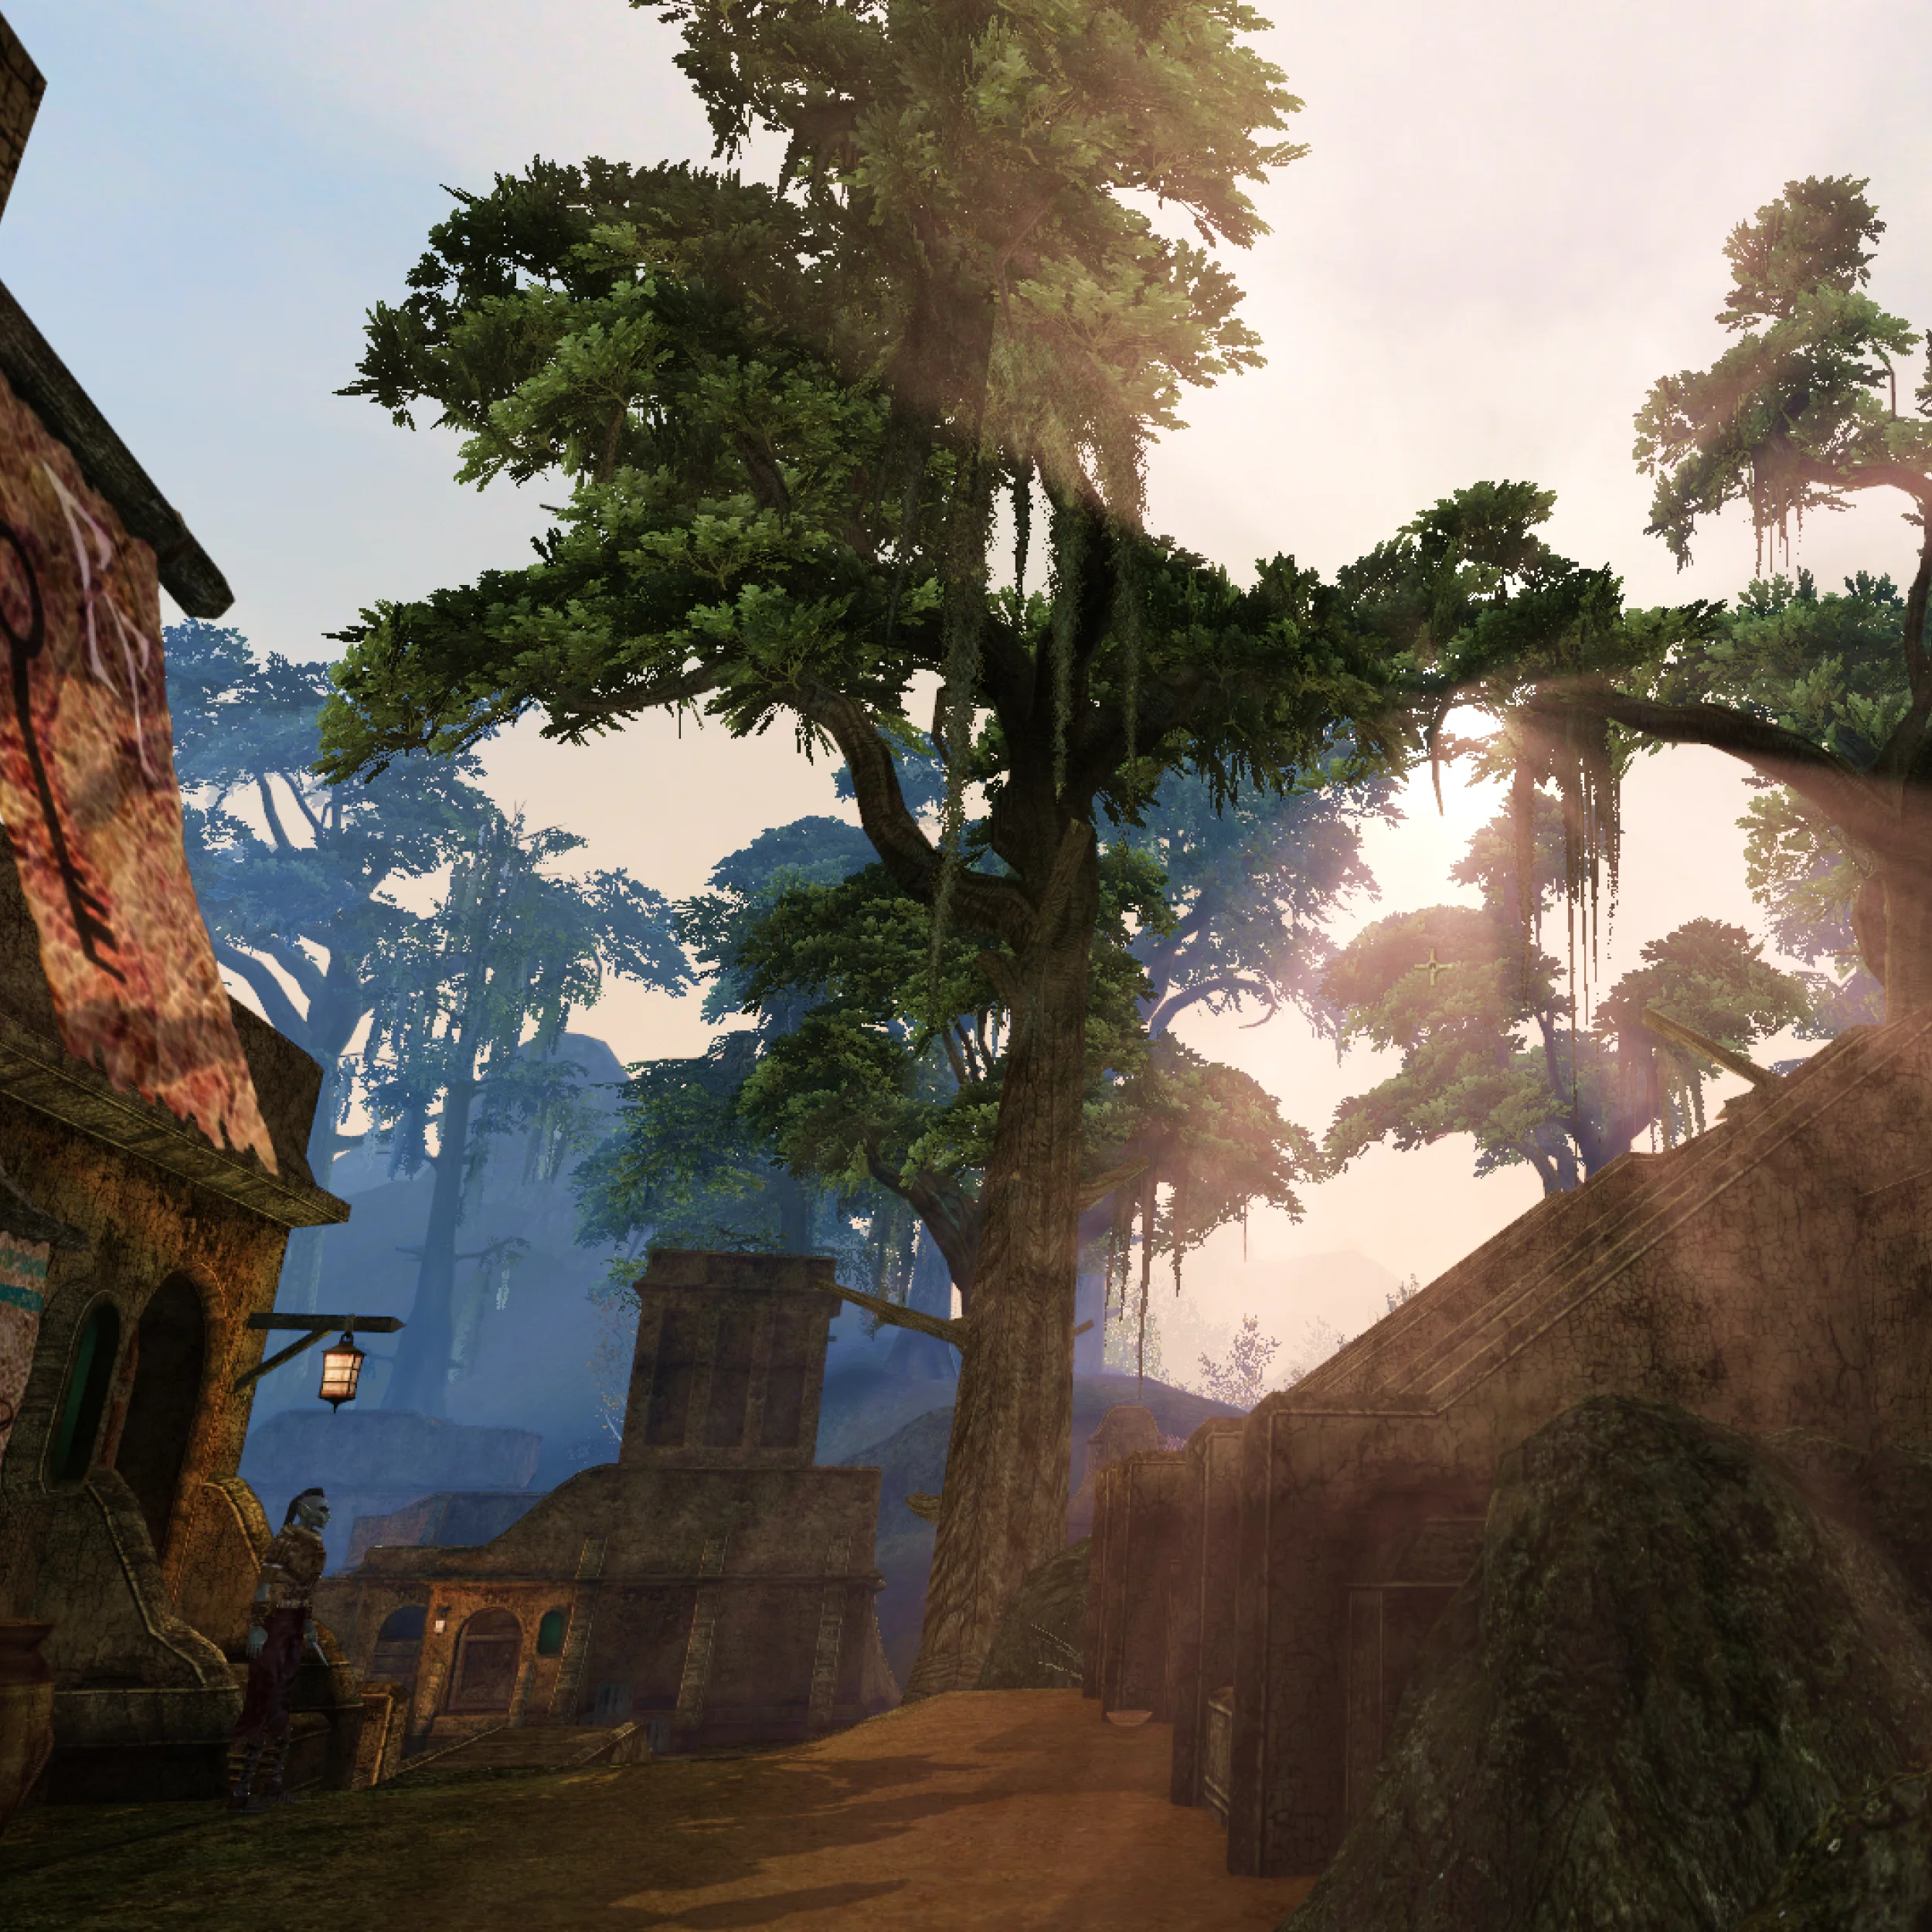 View from an alley in Morrowind game.